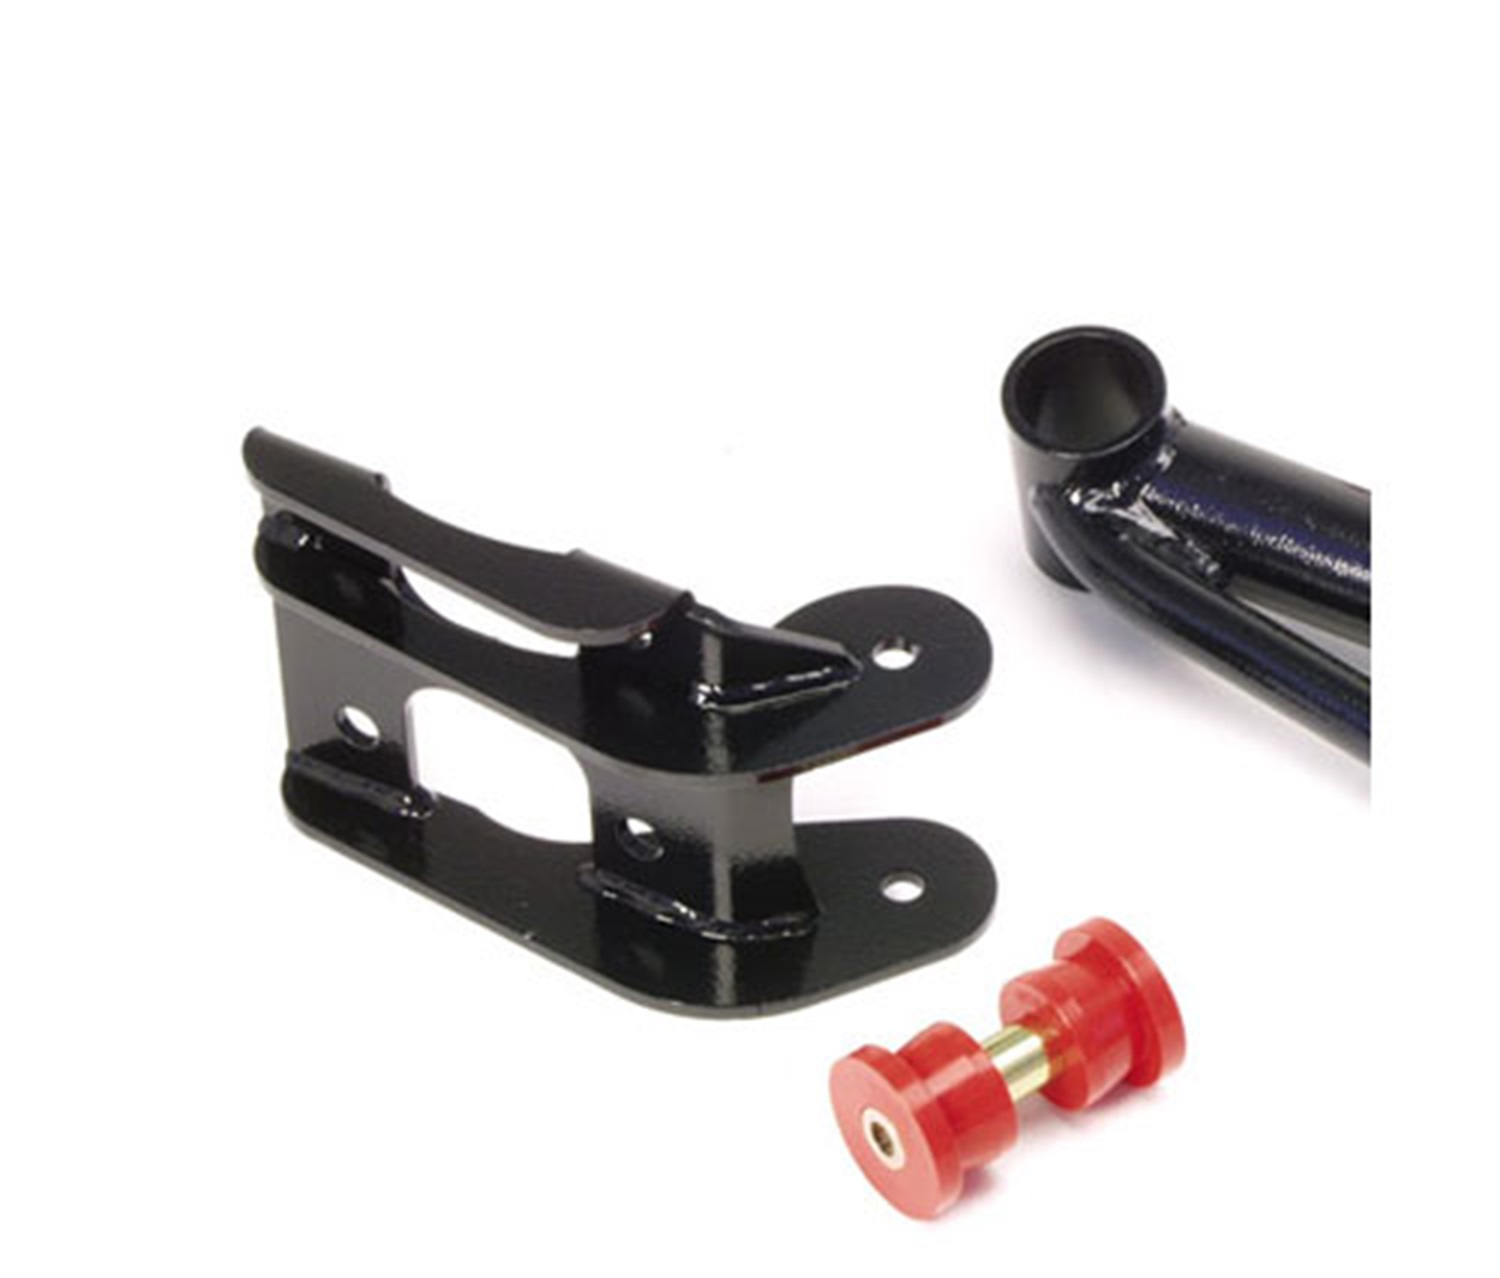 Pro Comp Suspension Pro Comp Suspension 77182B Traction Bar Mounting Kit Fits 96-03 Tacoma